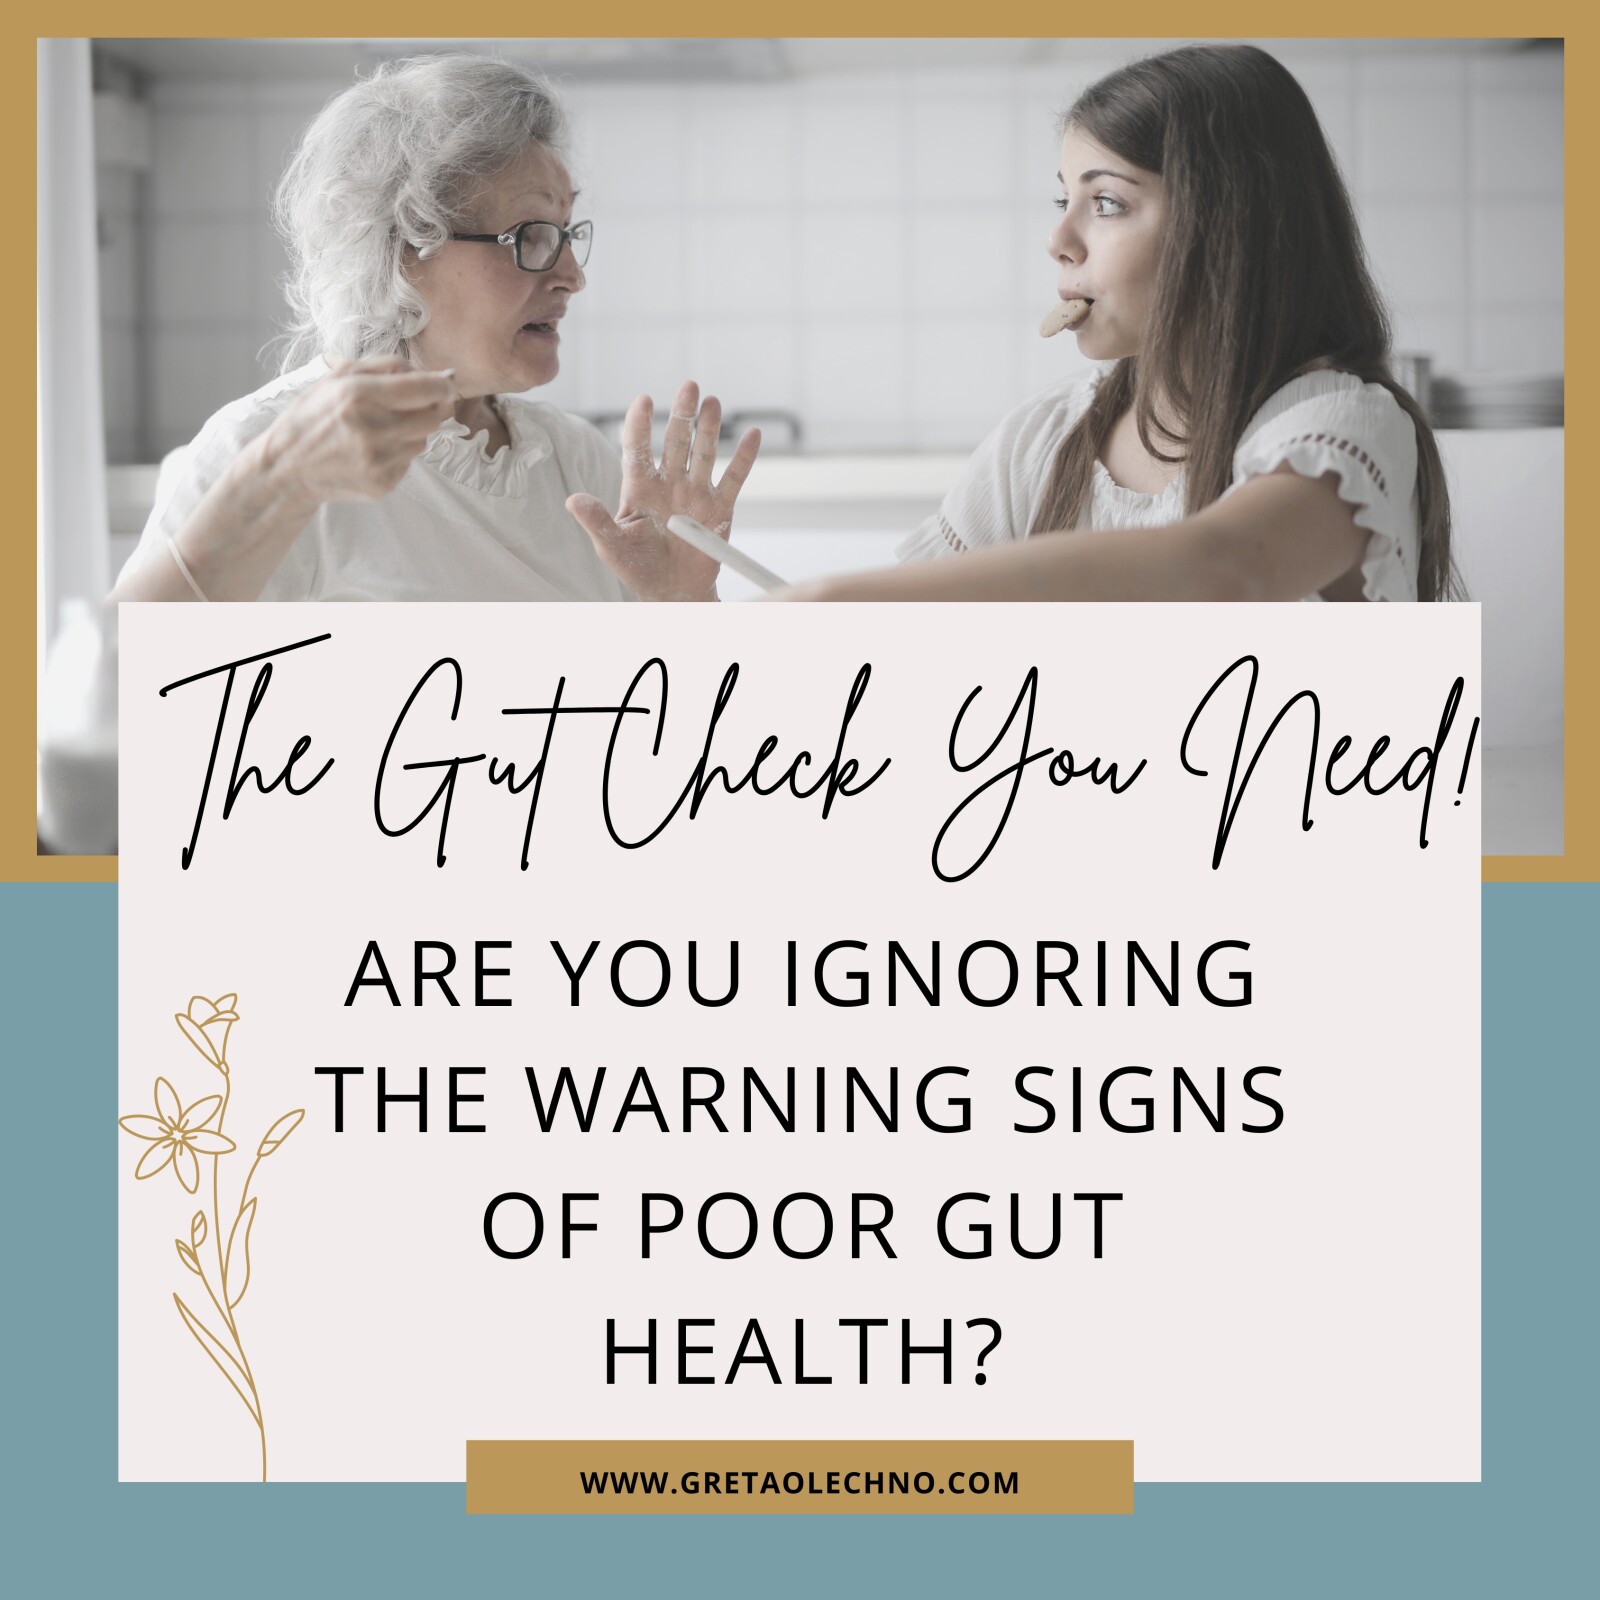 The gut-check you need: are you ignoring the warning signs of poor gut health?